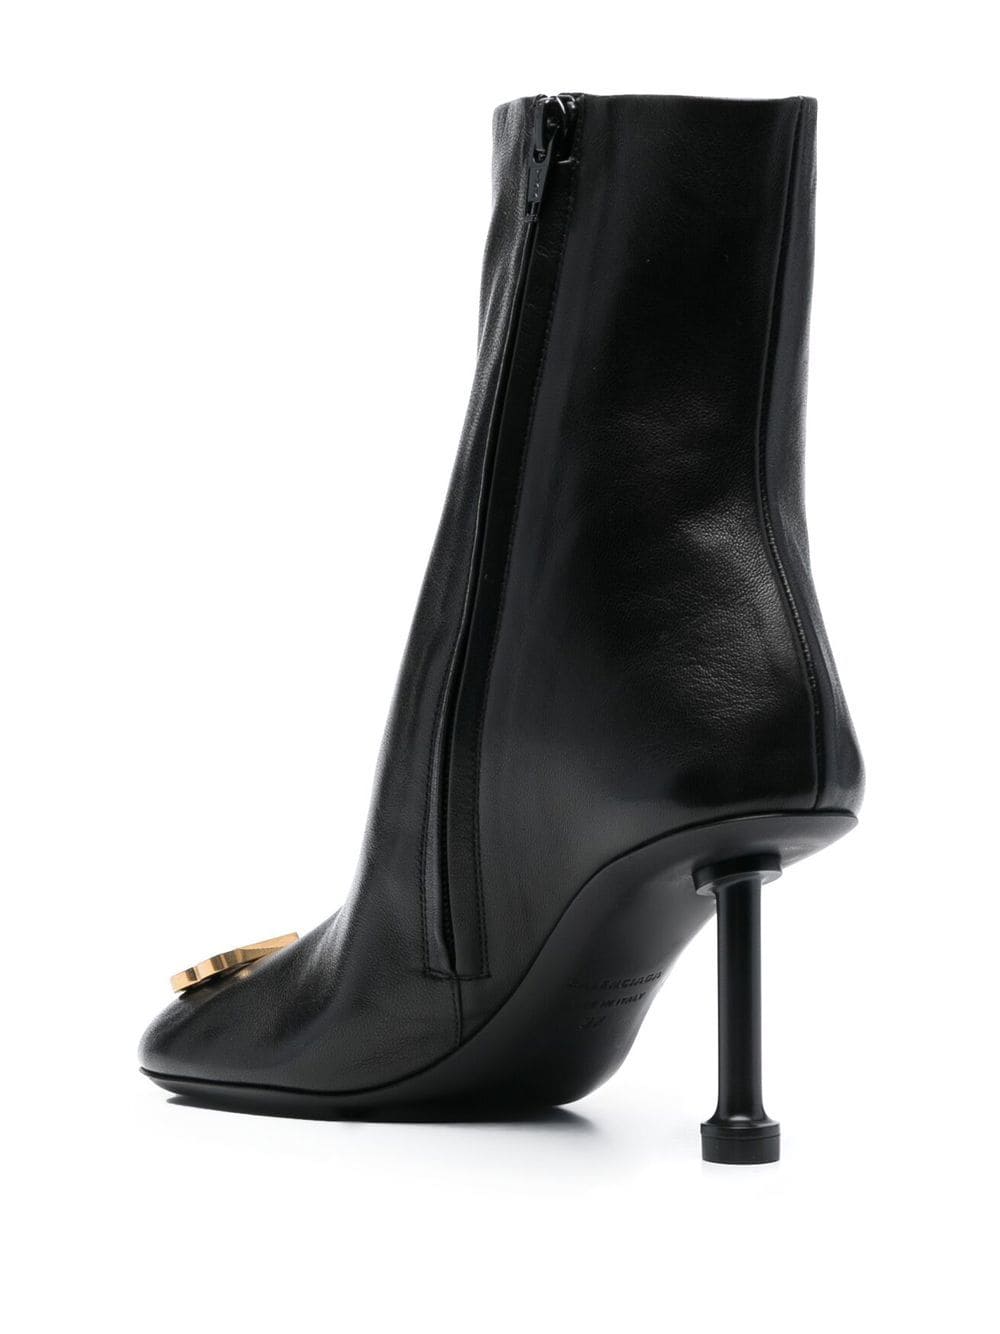 Shop Balenciaga Groupie Bootie 80mm Leather Boots In Black